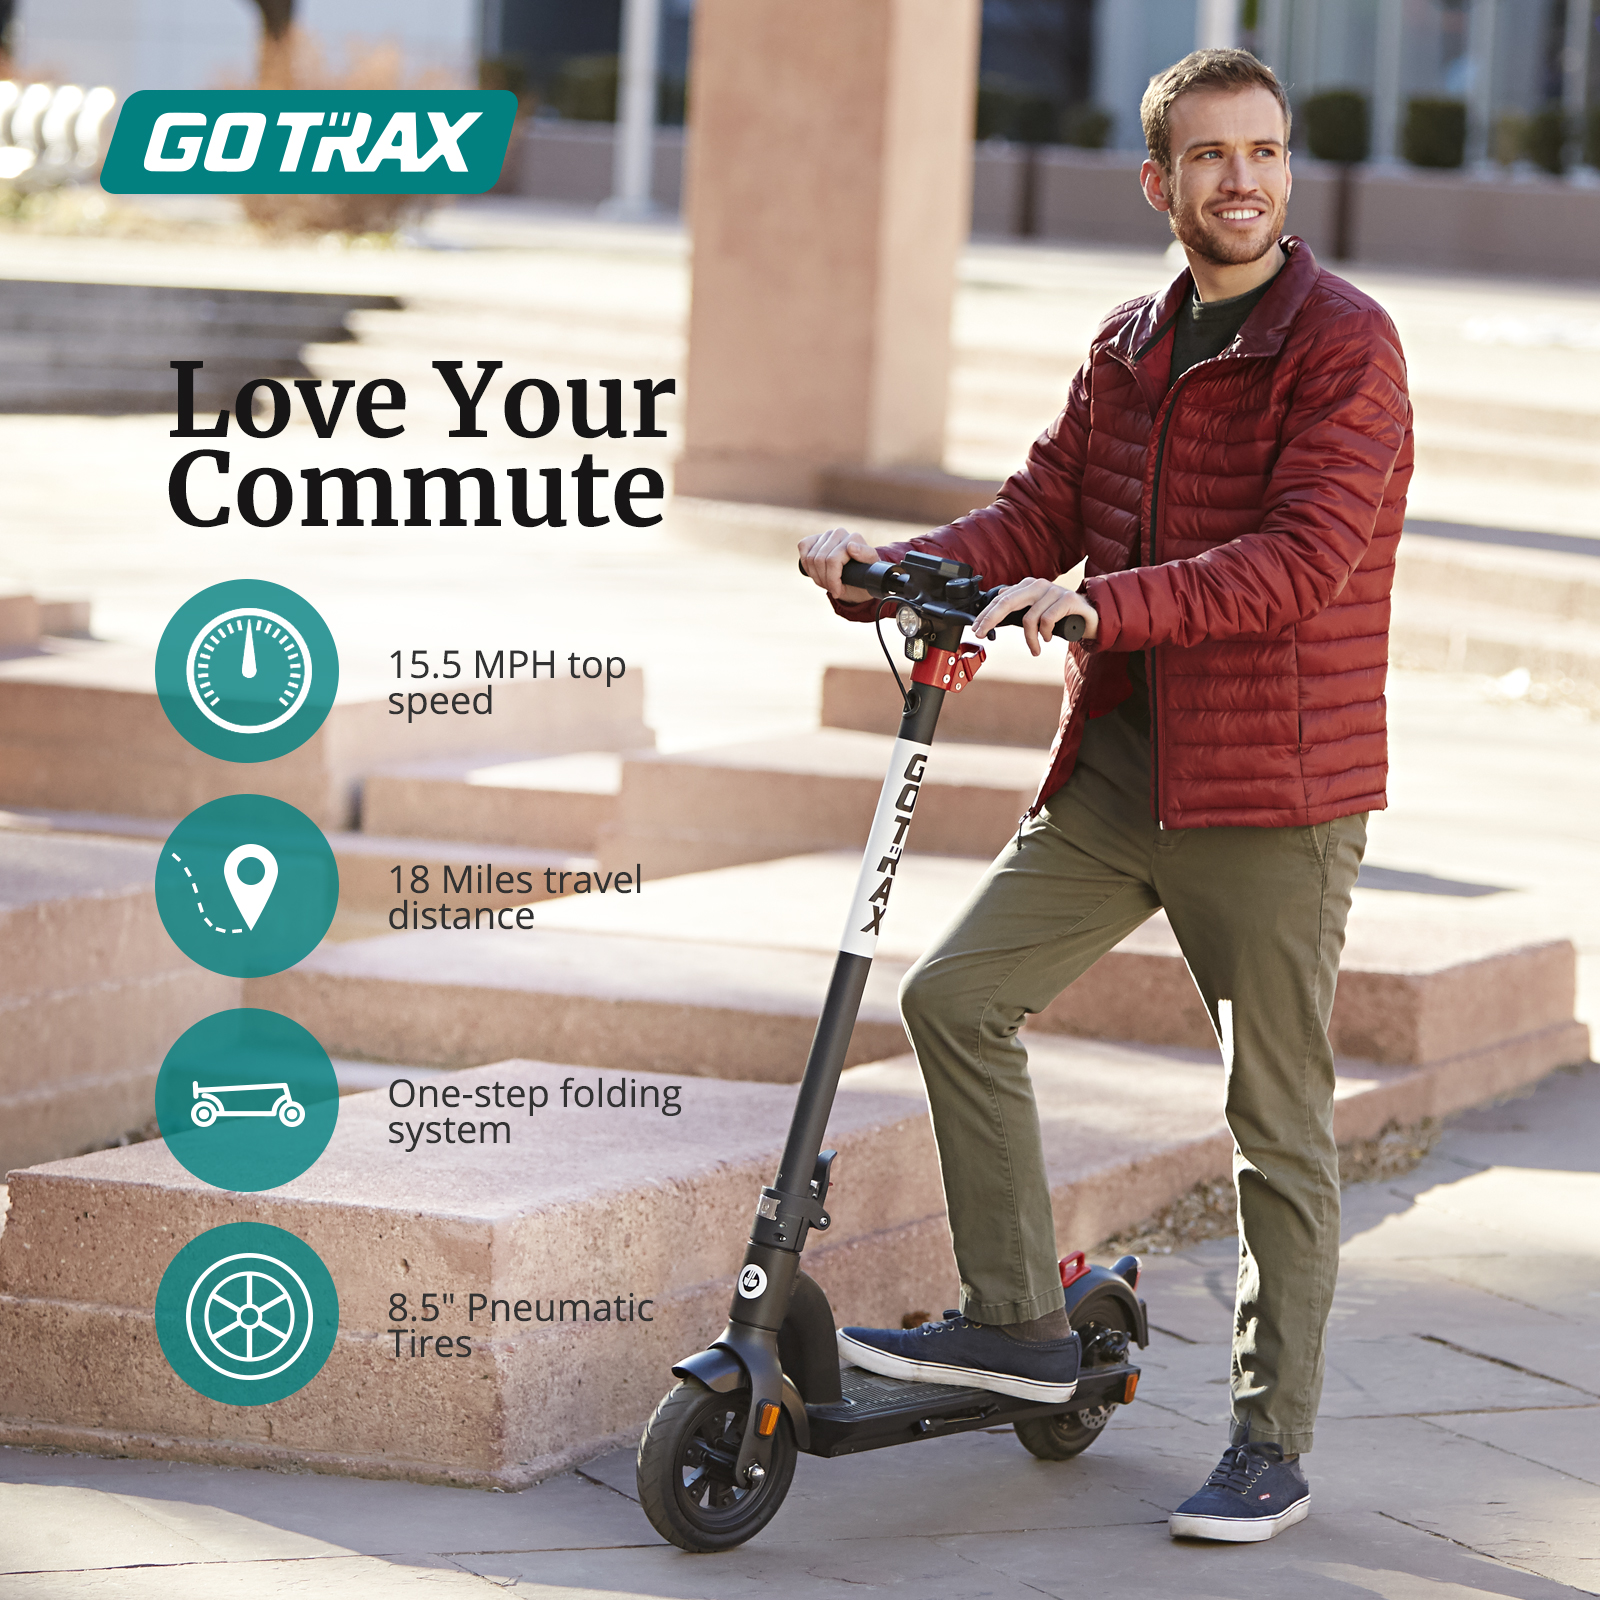 GOTRAX G3 Electric Scooter, 8.5" Pneumatic Tires, Max 18mile Range and 15.5Mph Power by 350W Motor, Foldable Escooter for Adult Unisex,Black - image 4 of 9